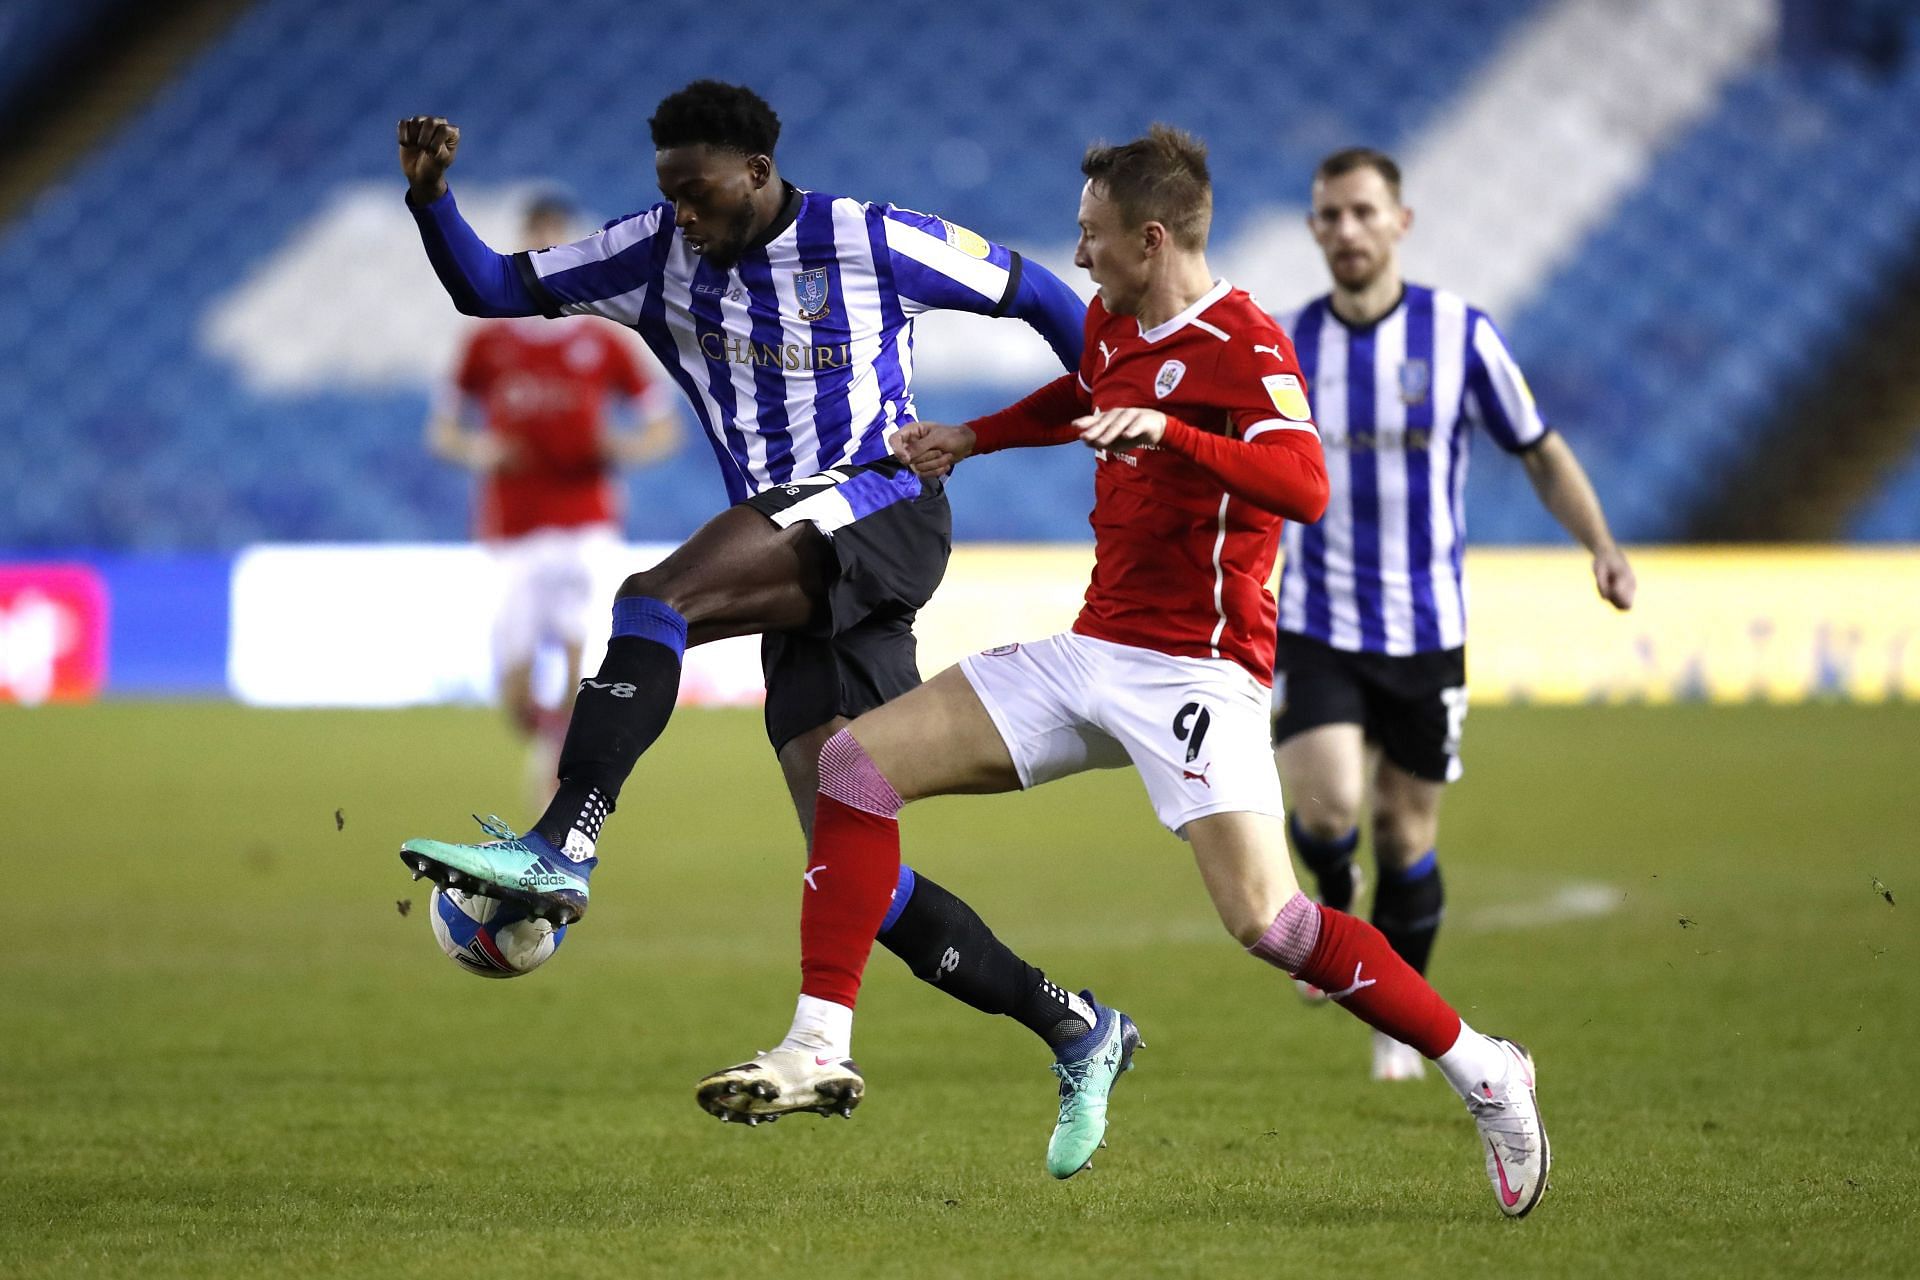 Barnsley vs Sheffield Wednesday Prediction and Betting Tips | March 21st 2023